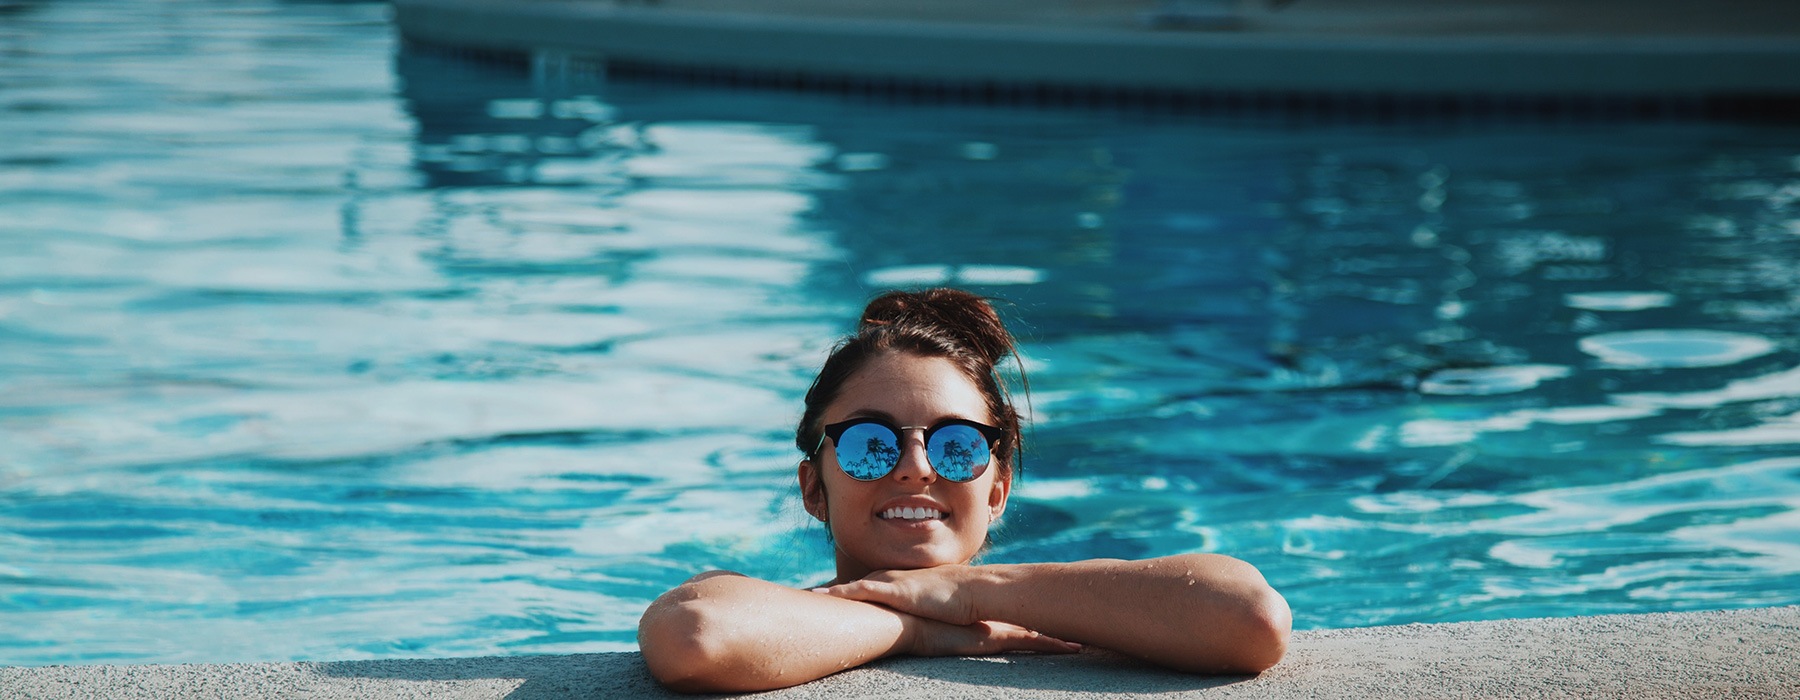 lifestyle image of a woman leaning on the edge of a pool with sunglasses on her head